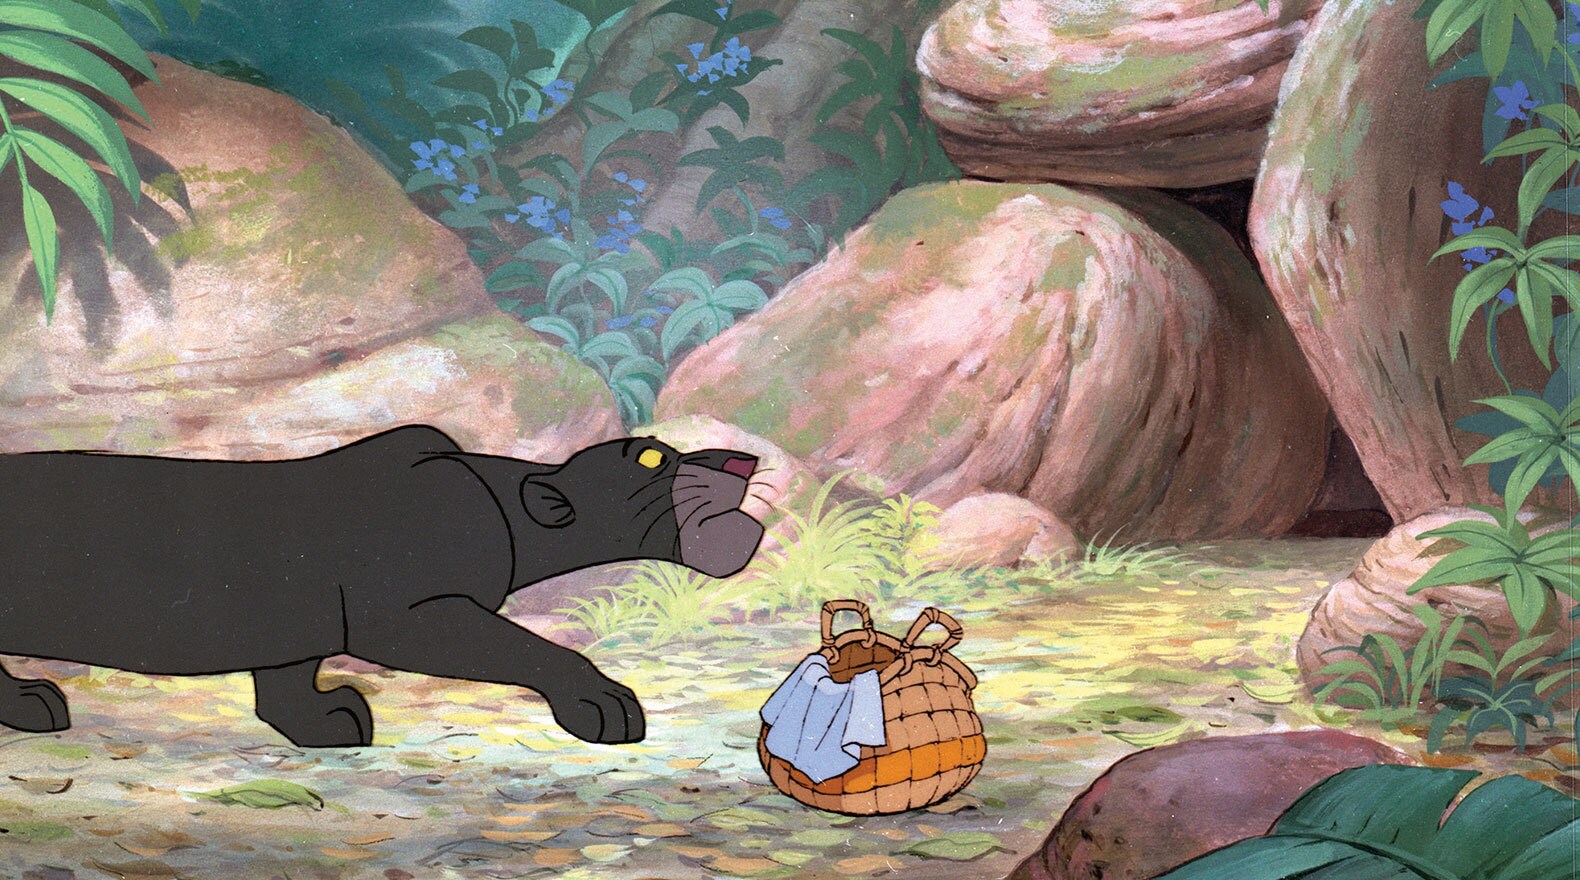 Bagheera hopes a family of wolves will adopt baby Mowgli. Bagheera (voice of Sebastian Cabot) from the Disney movie The Jungle Book (1967).